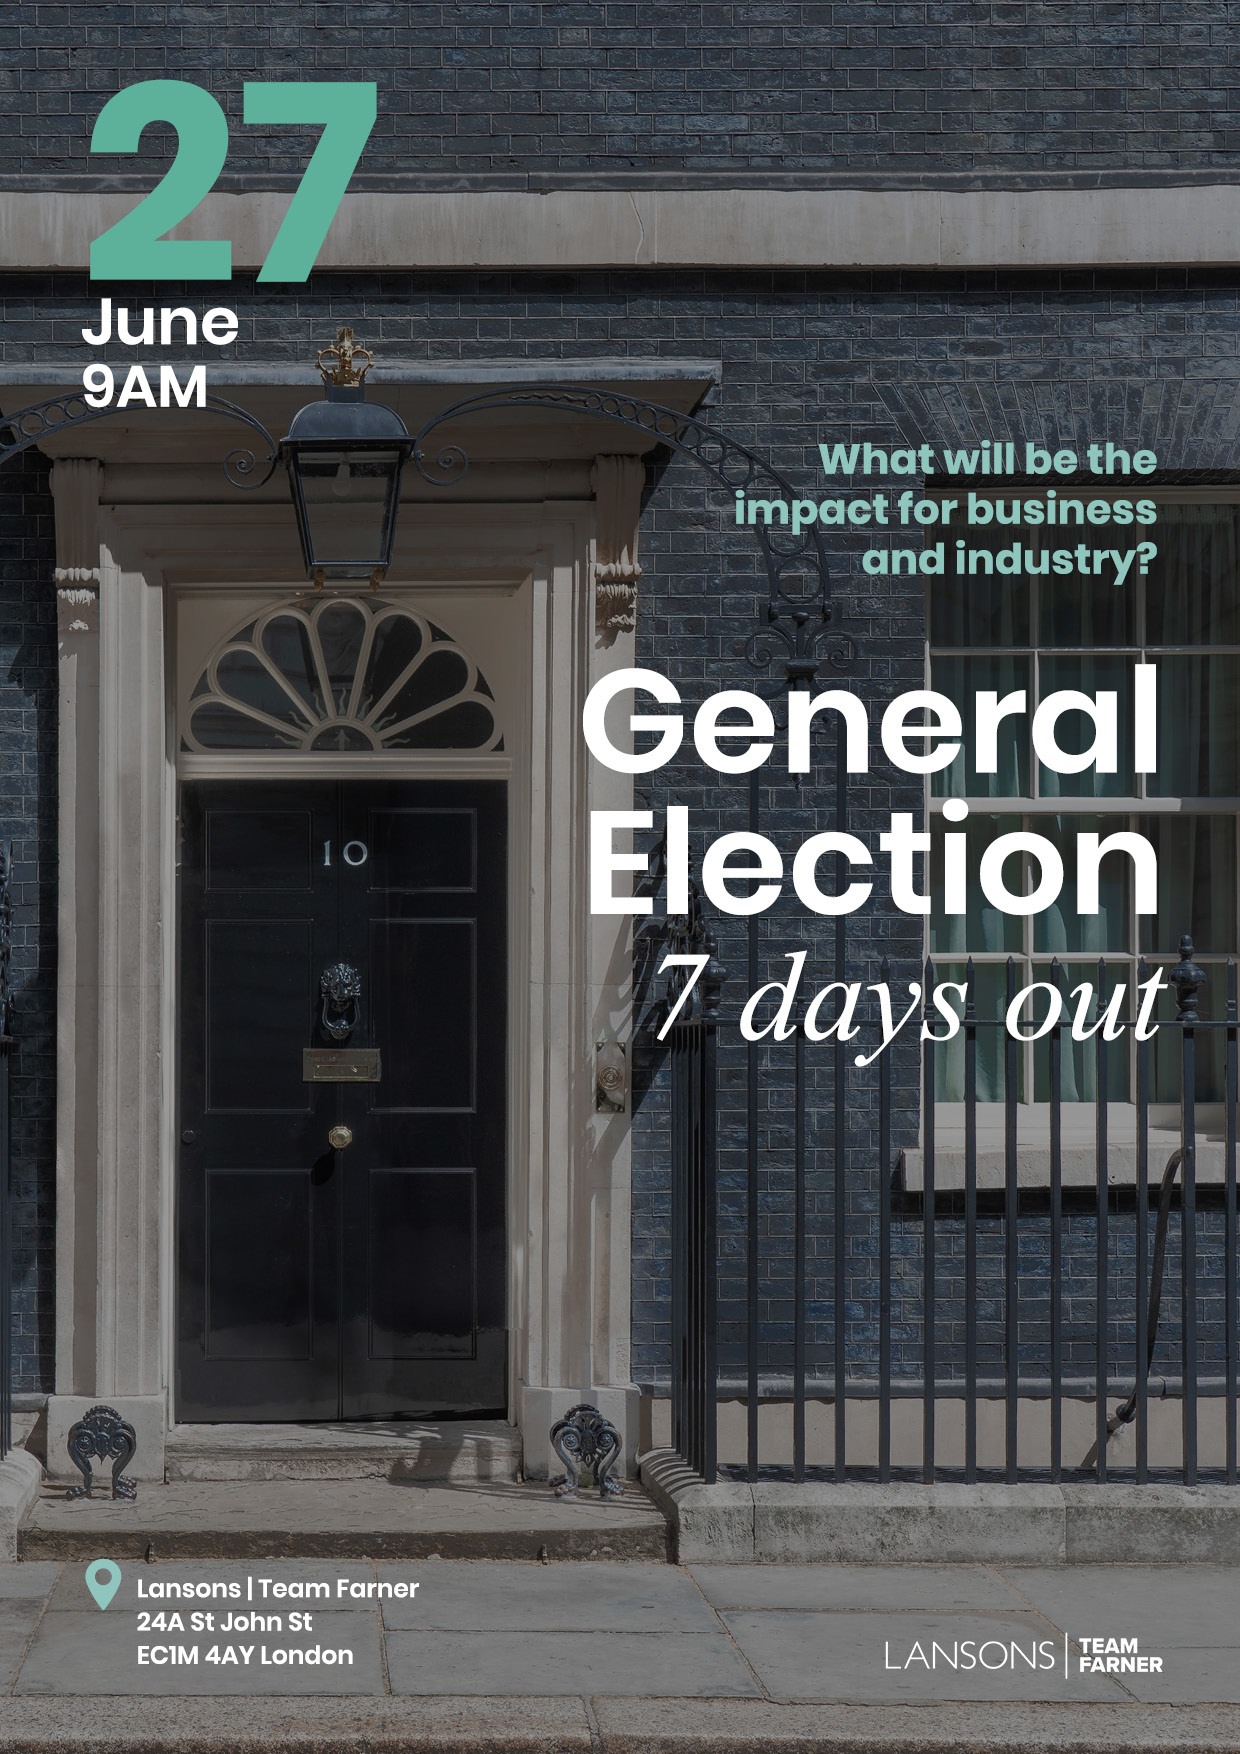 General Election - 7 days out